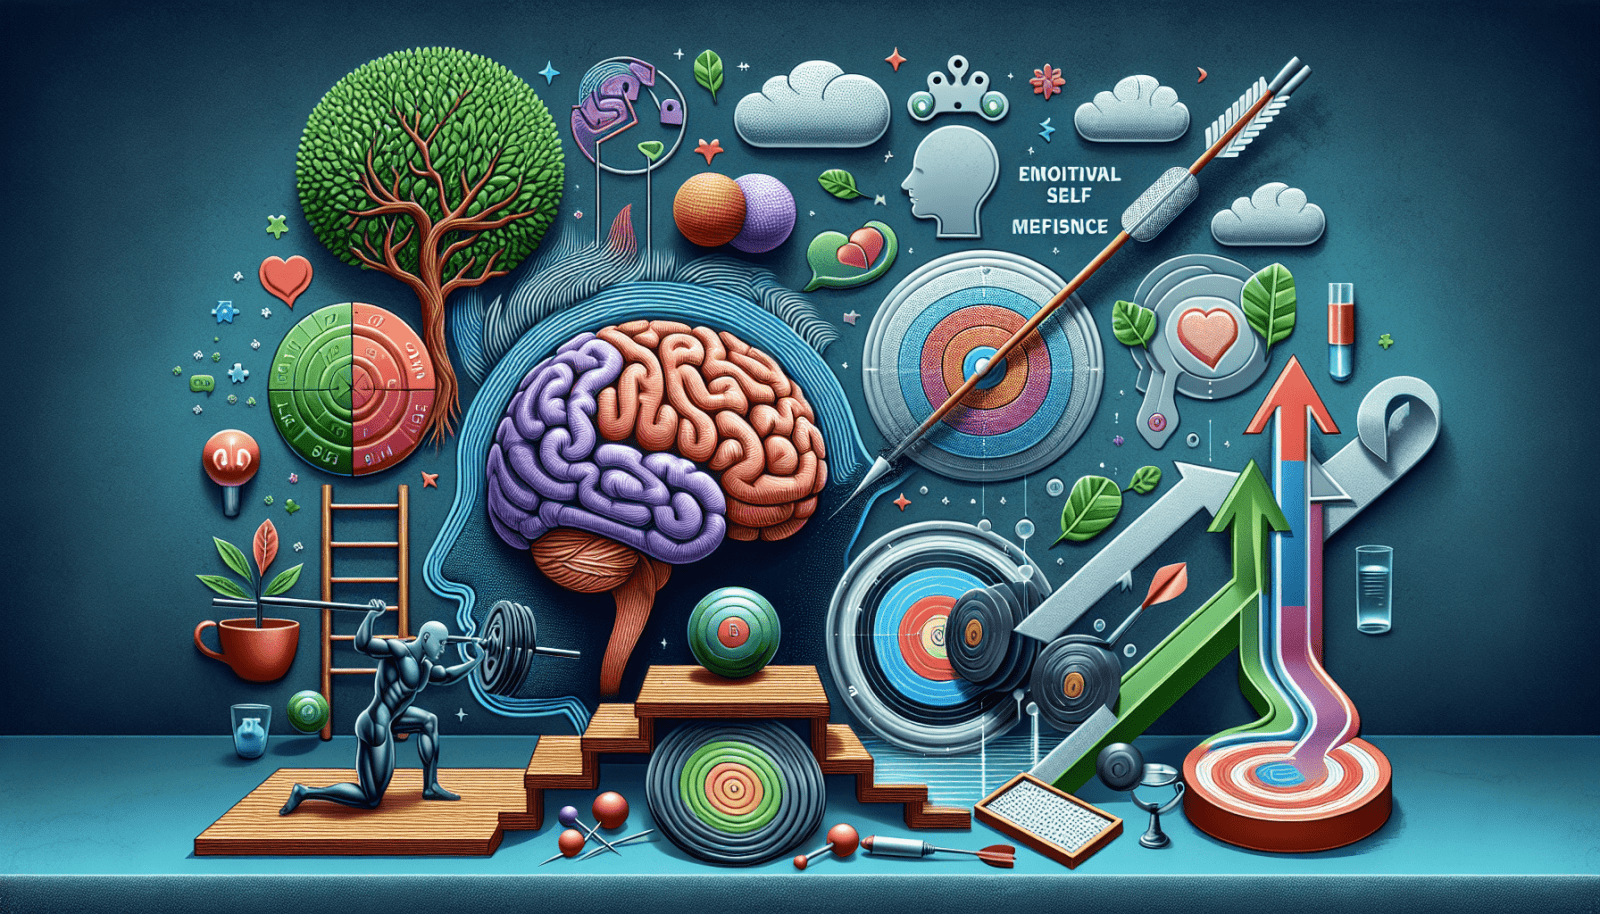 An intricate digital artwork conceptualizing brain function and mental growth, featuring a large, colorful brain in the center with various symbolic elements such as trees, gears, a ladder, and abstract representations of creativity, growth, emotion, and self-improvement surrounding it.